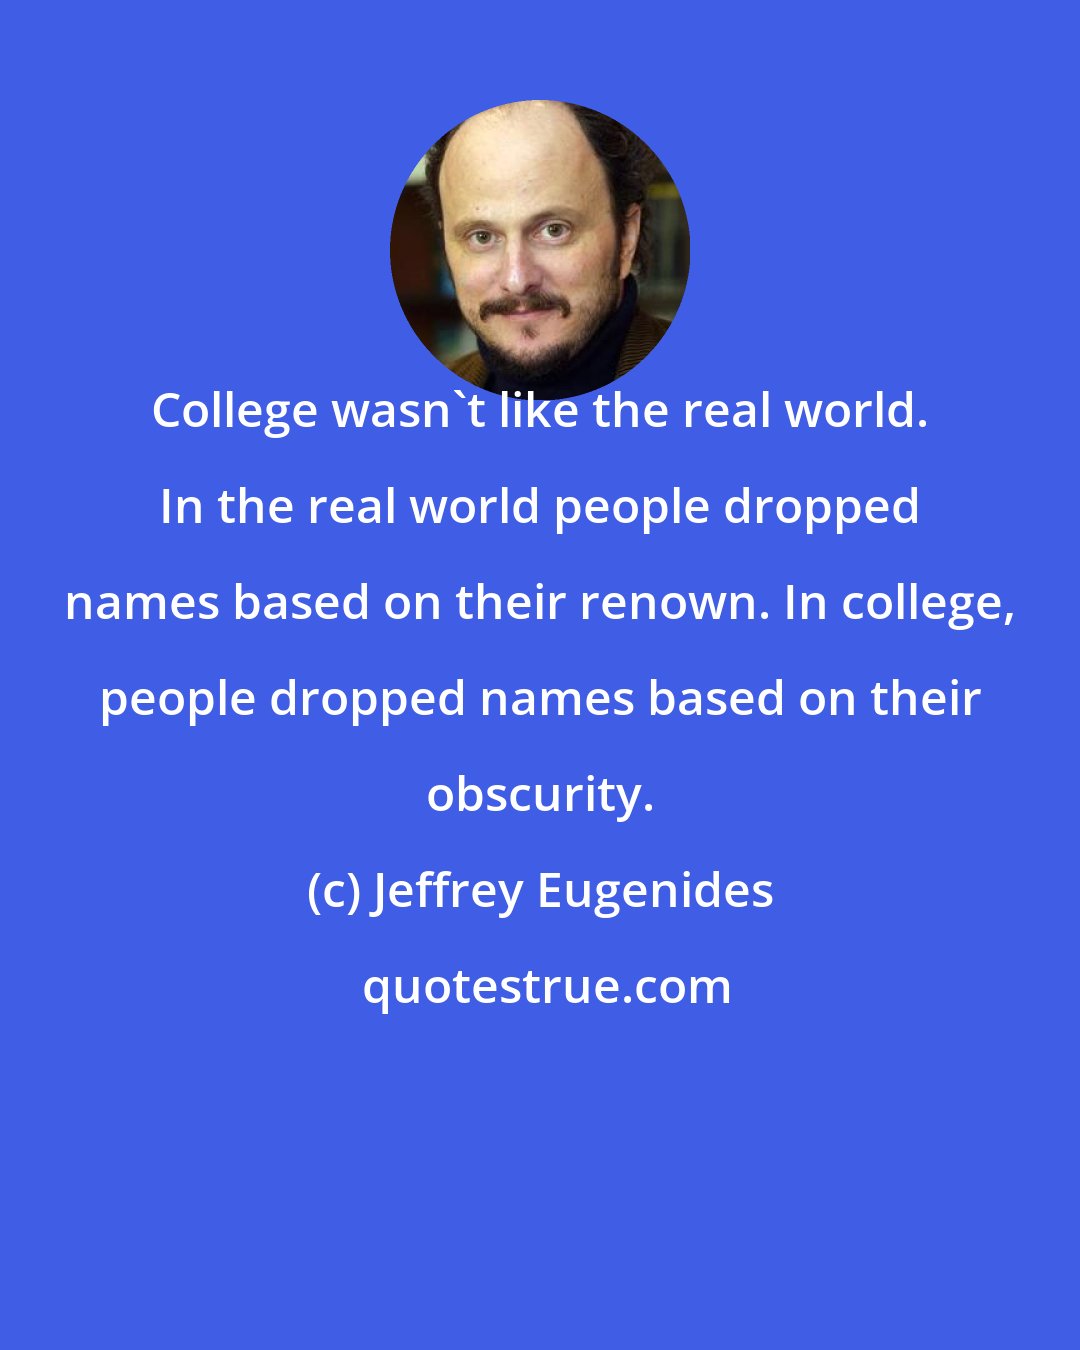 Jeffrey Eugenides: College wasn't like the real world. In the real world people dropped names based on their renown. In college, people dropped names based on their obscurity.